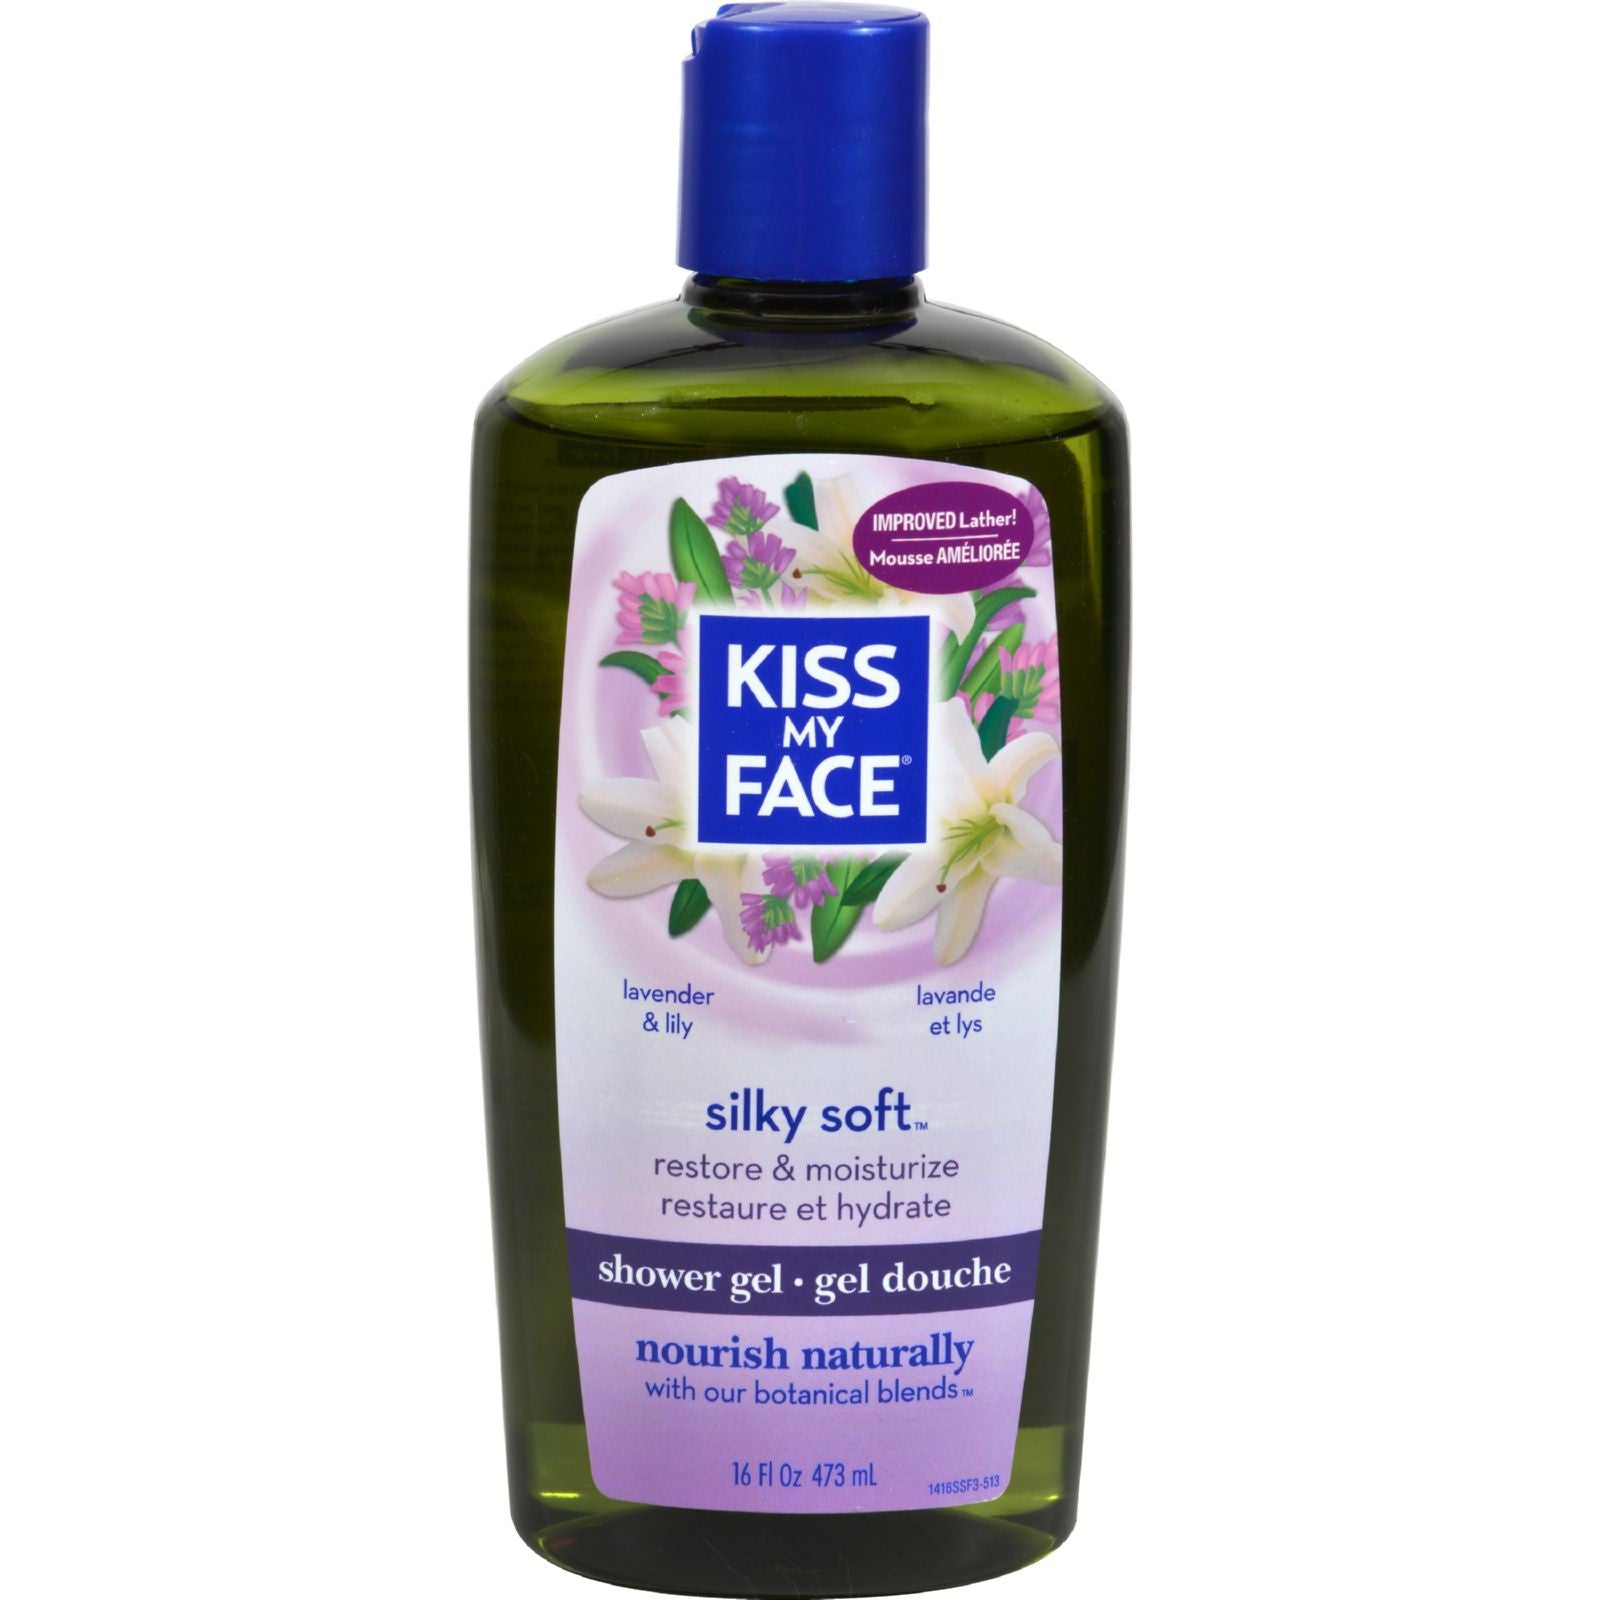 Kiss My Face Bath And Shower Gel Silky Soft Lavender And Lily - 16 Fl Oz